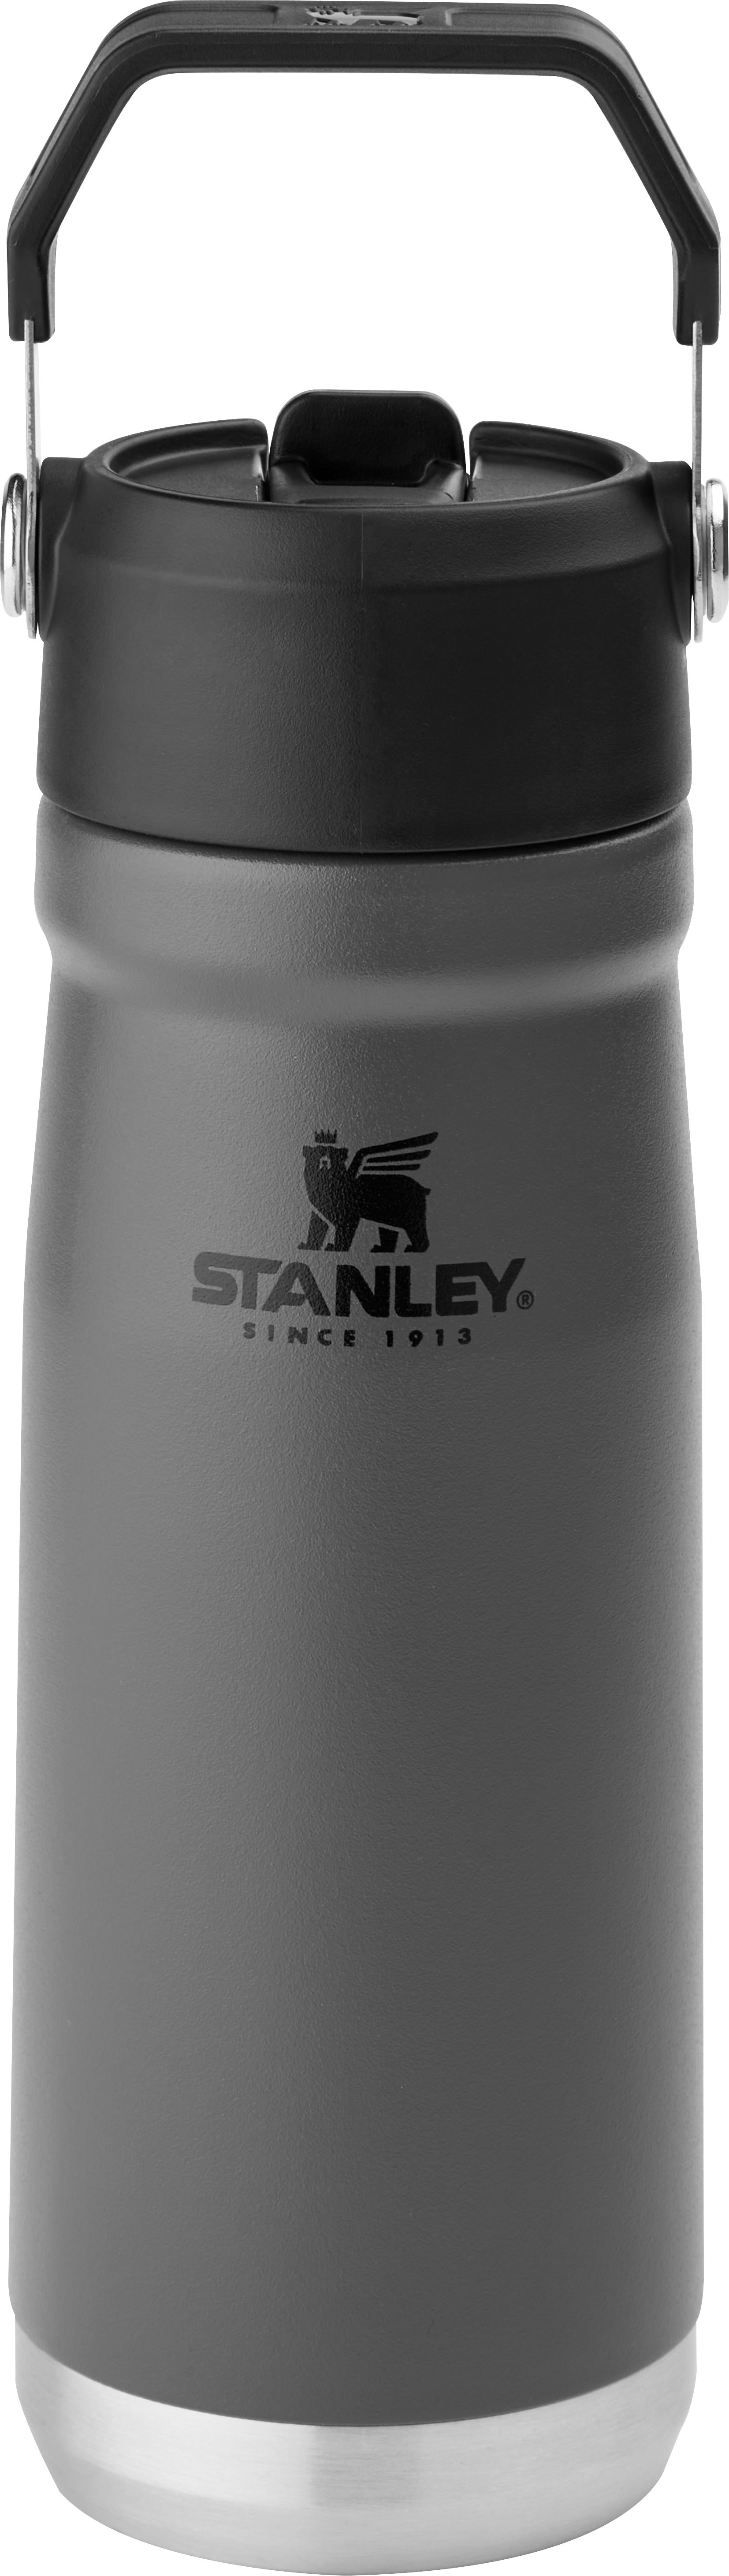 STANLEY 22 oz Lagoon Blue and Gray Insulated Stainless Steel Water